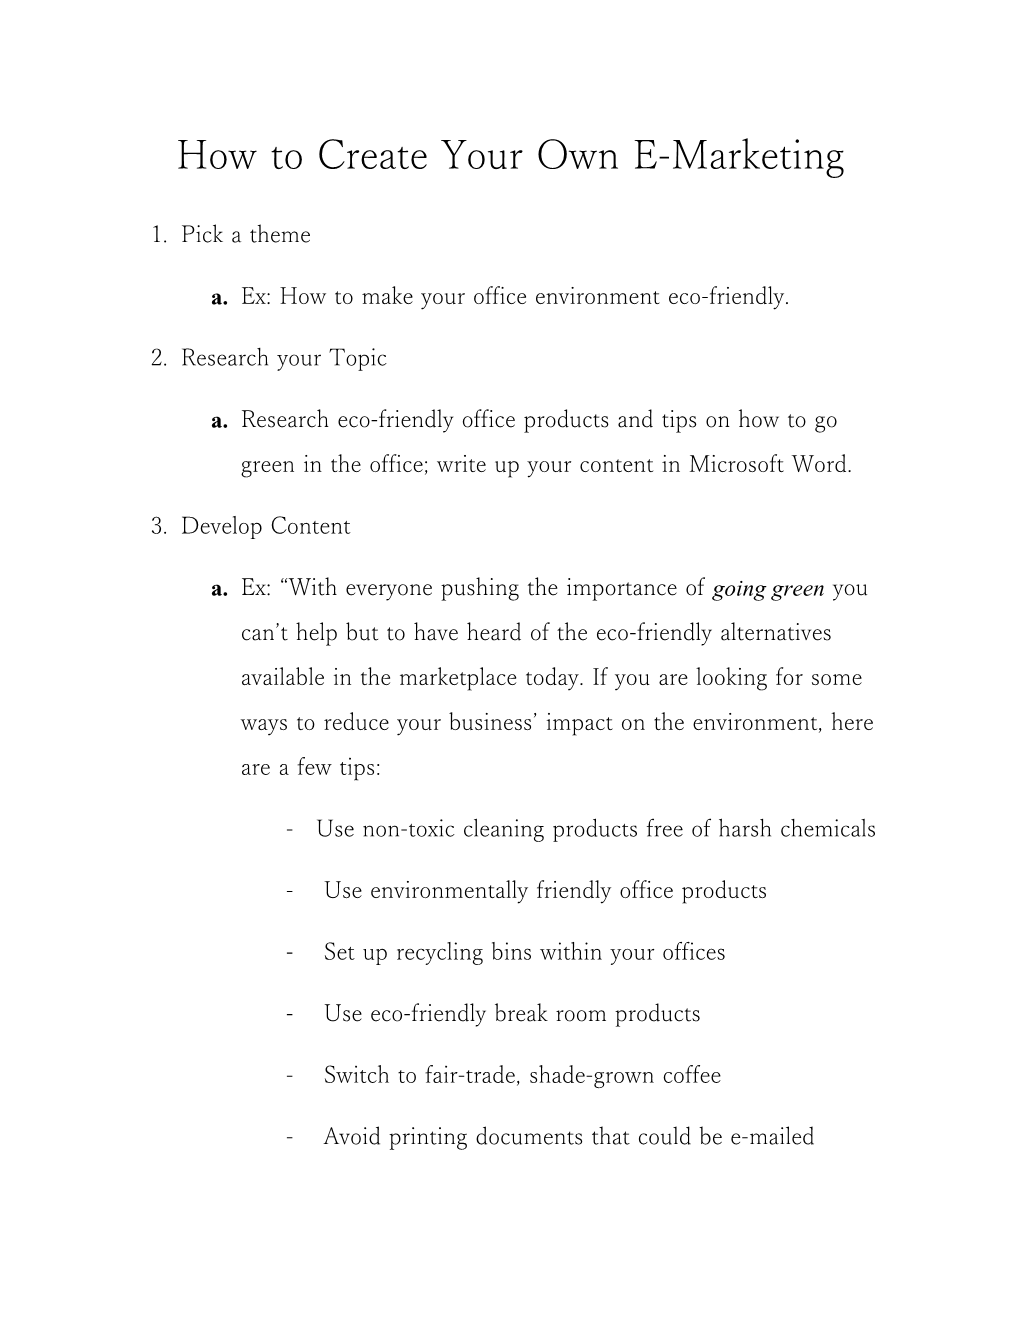 How to Create Your Own E-Marketing